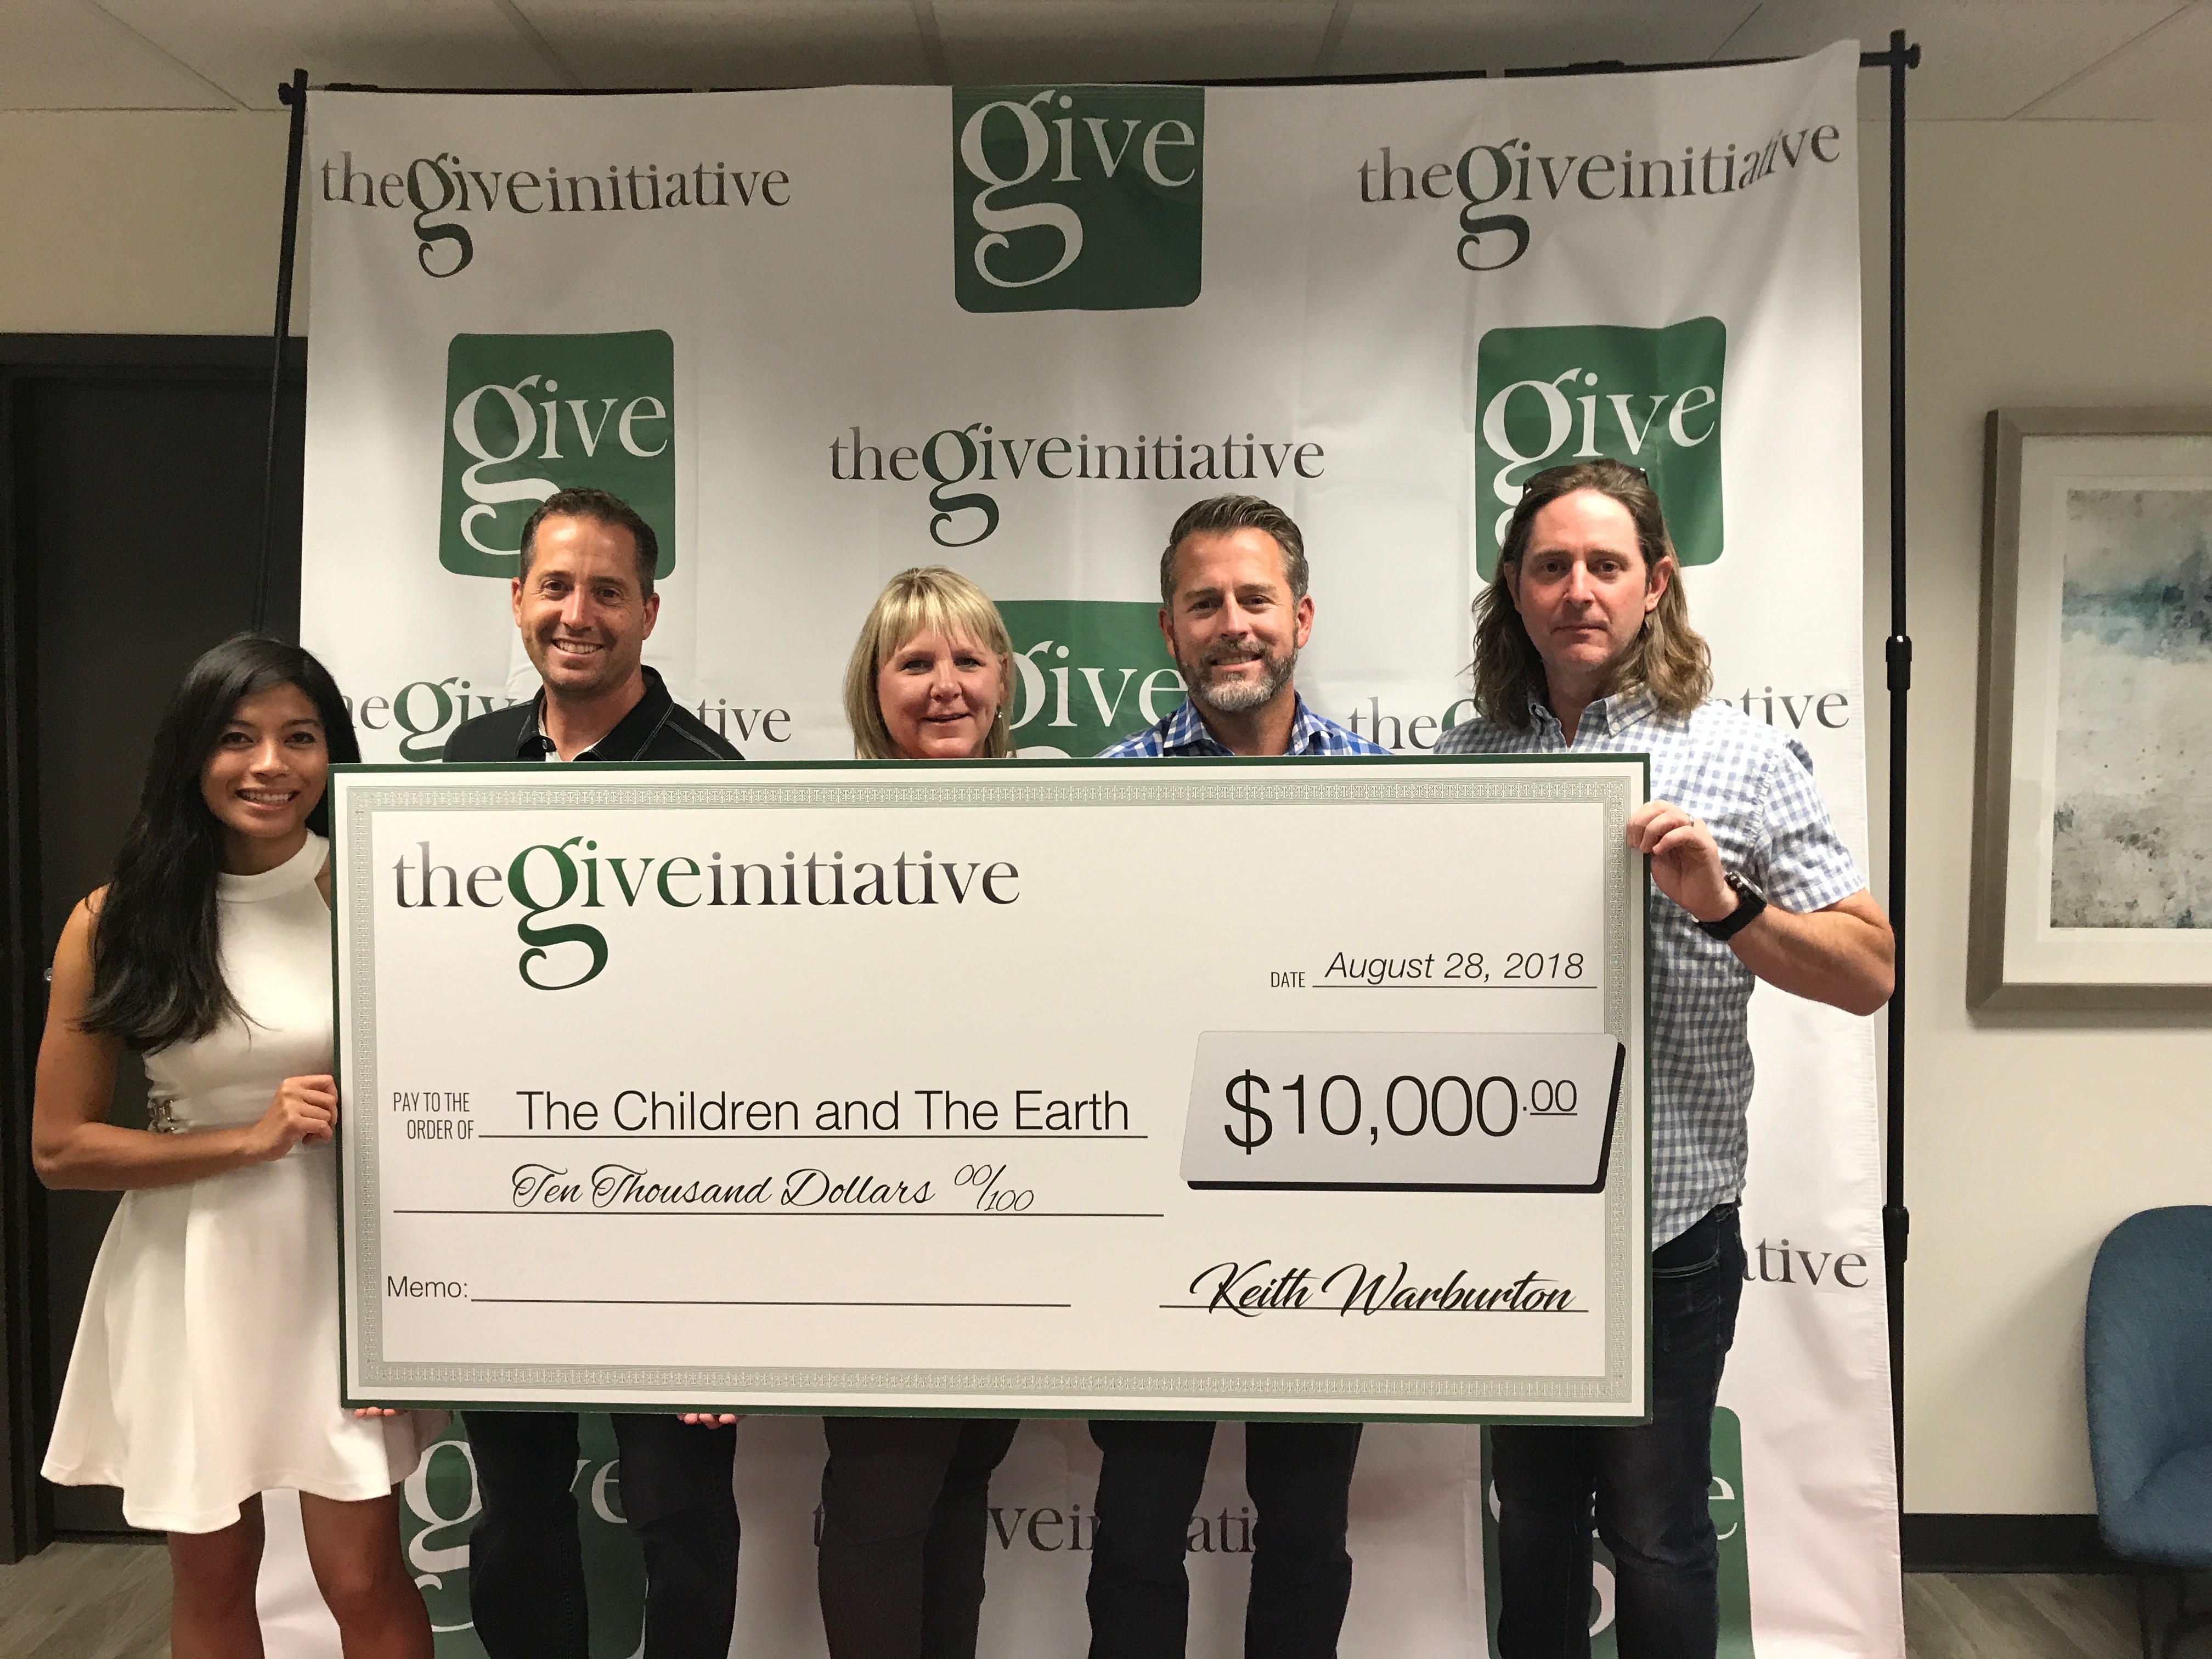 The Give Initiative presenting check of $10,000 to The Children and The Earth